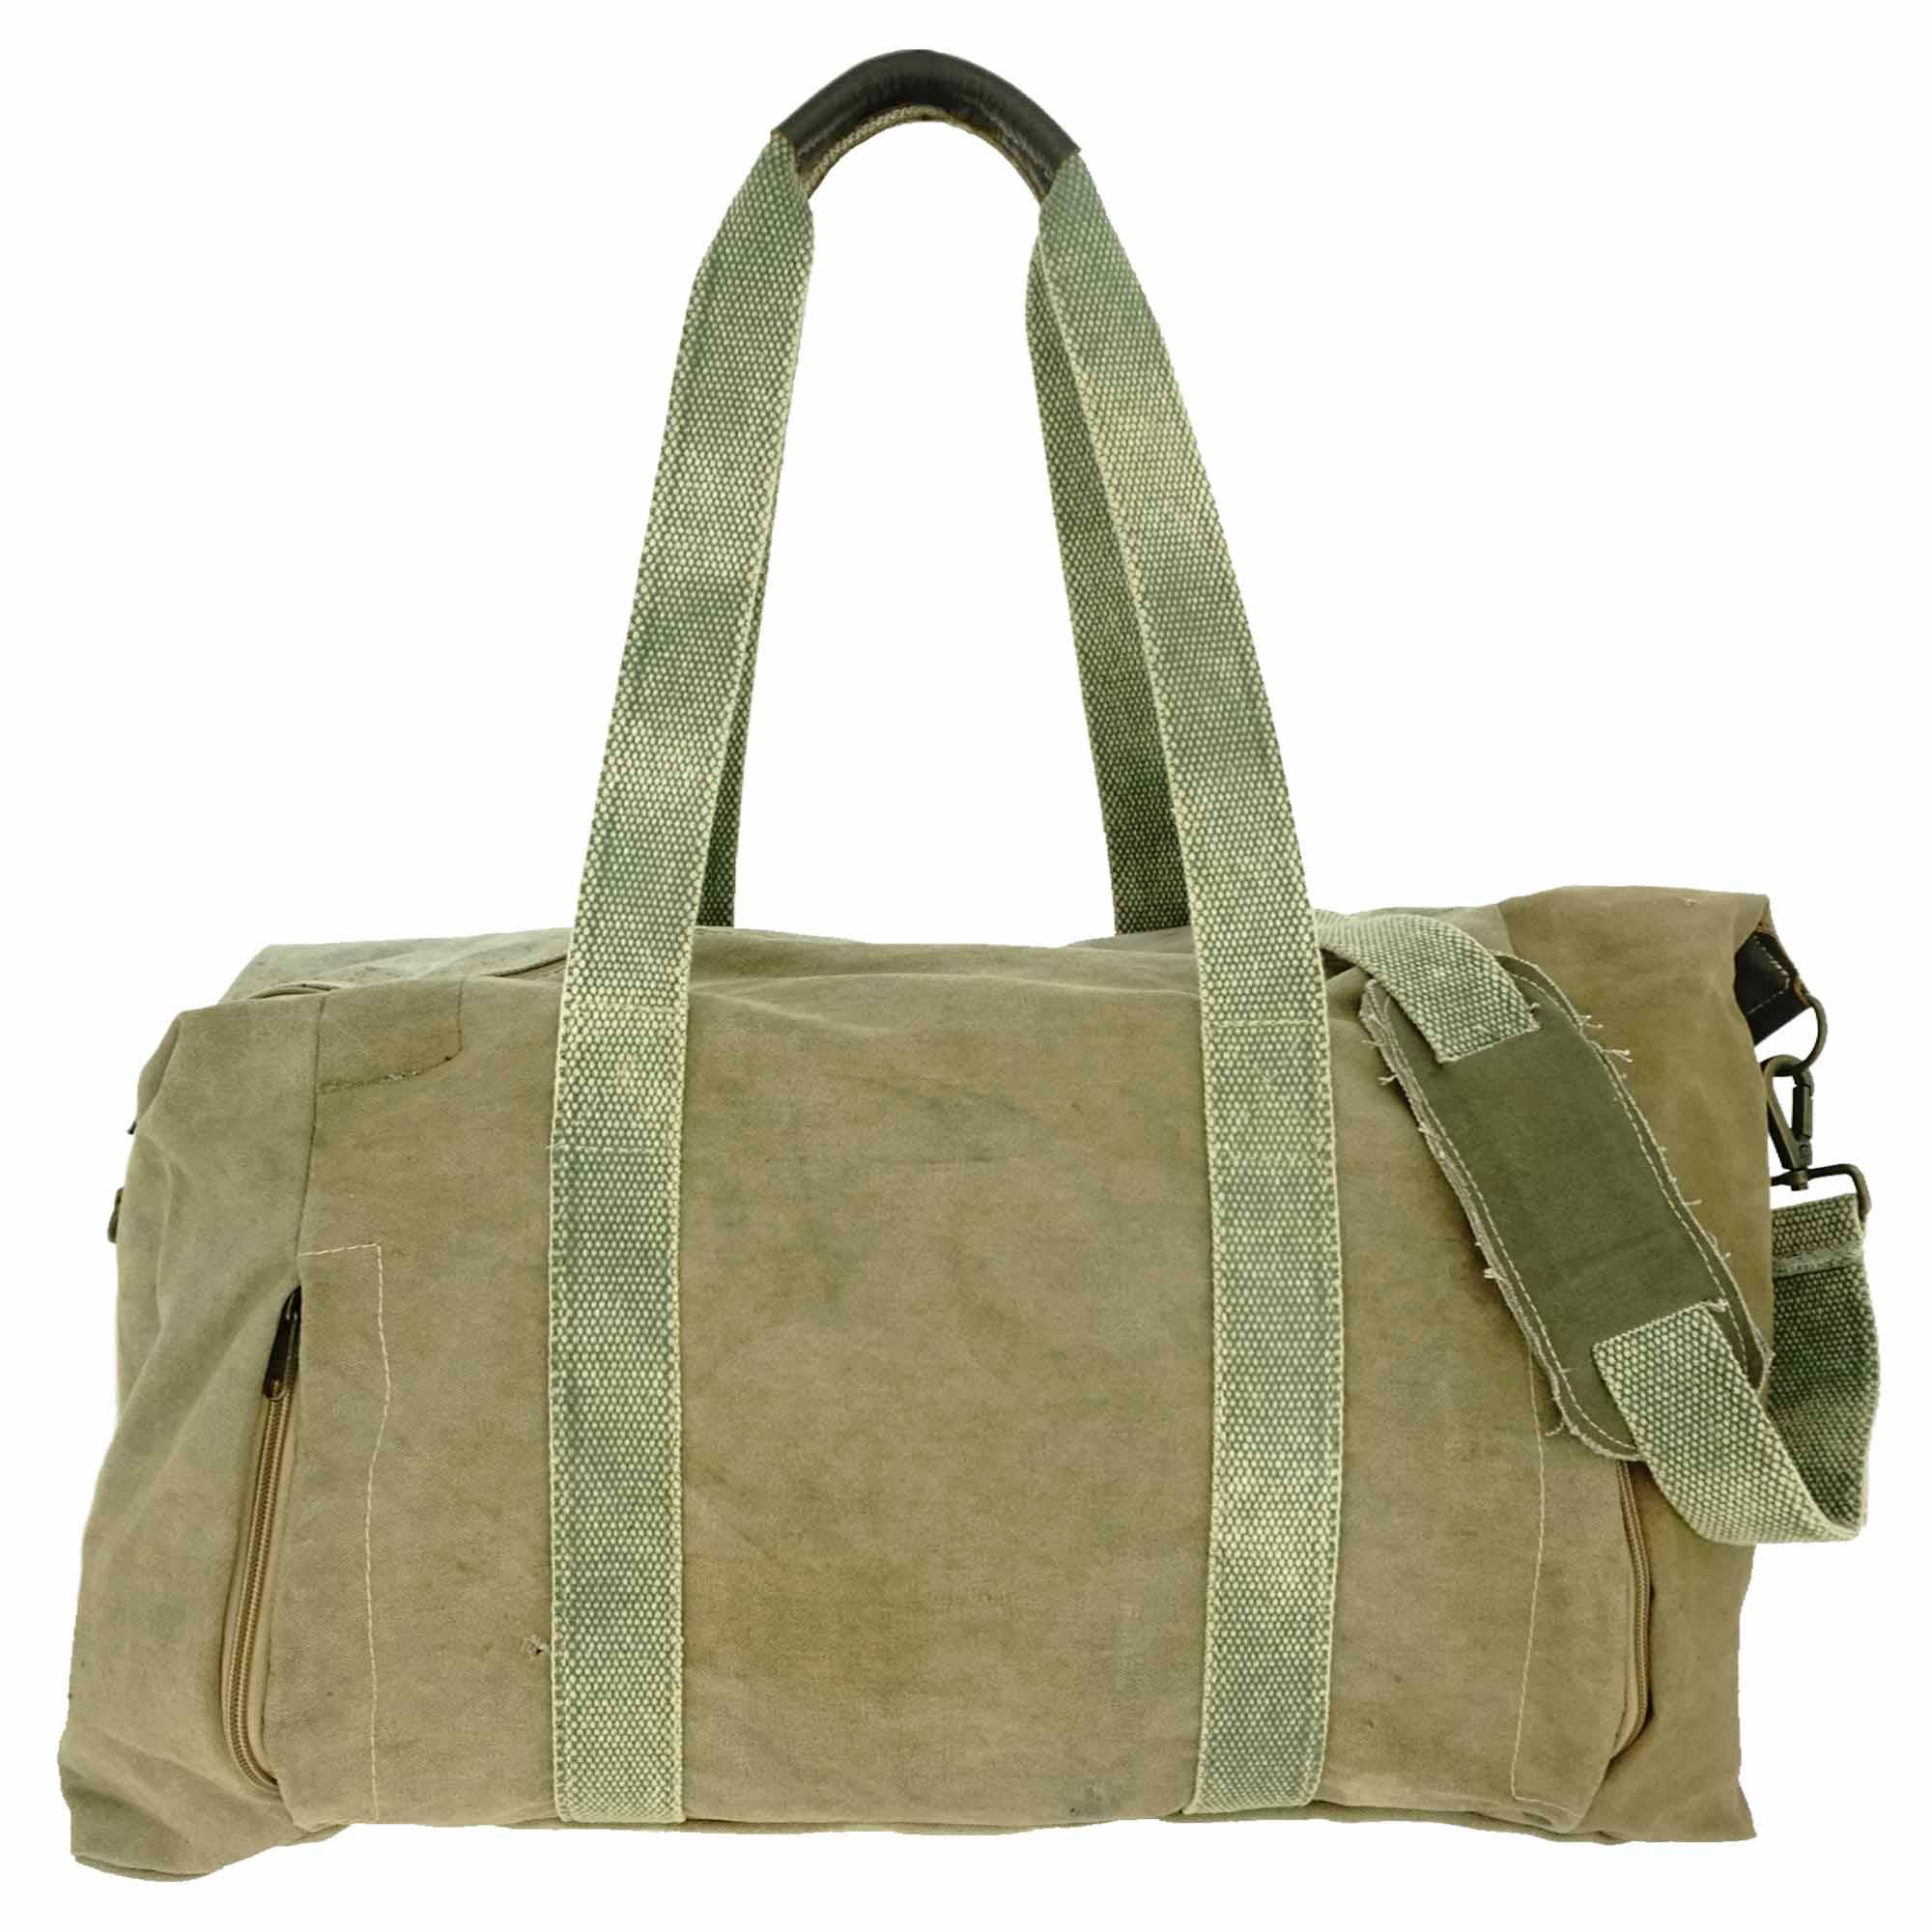 Recycled Military Tent w/Vintage Textiles Overnight Travel Bag